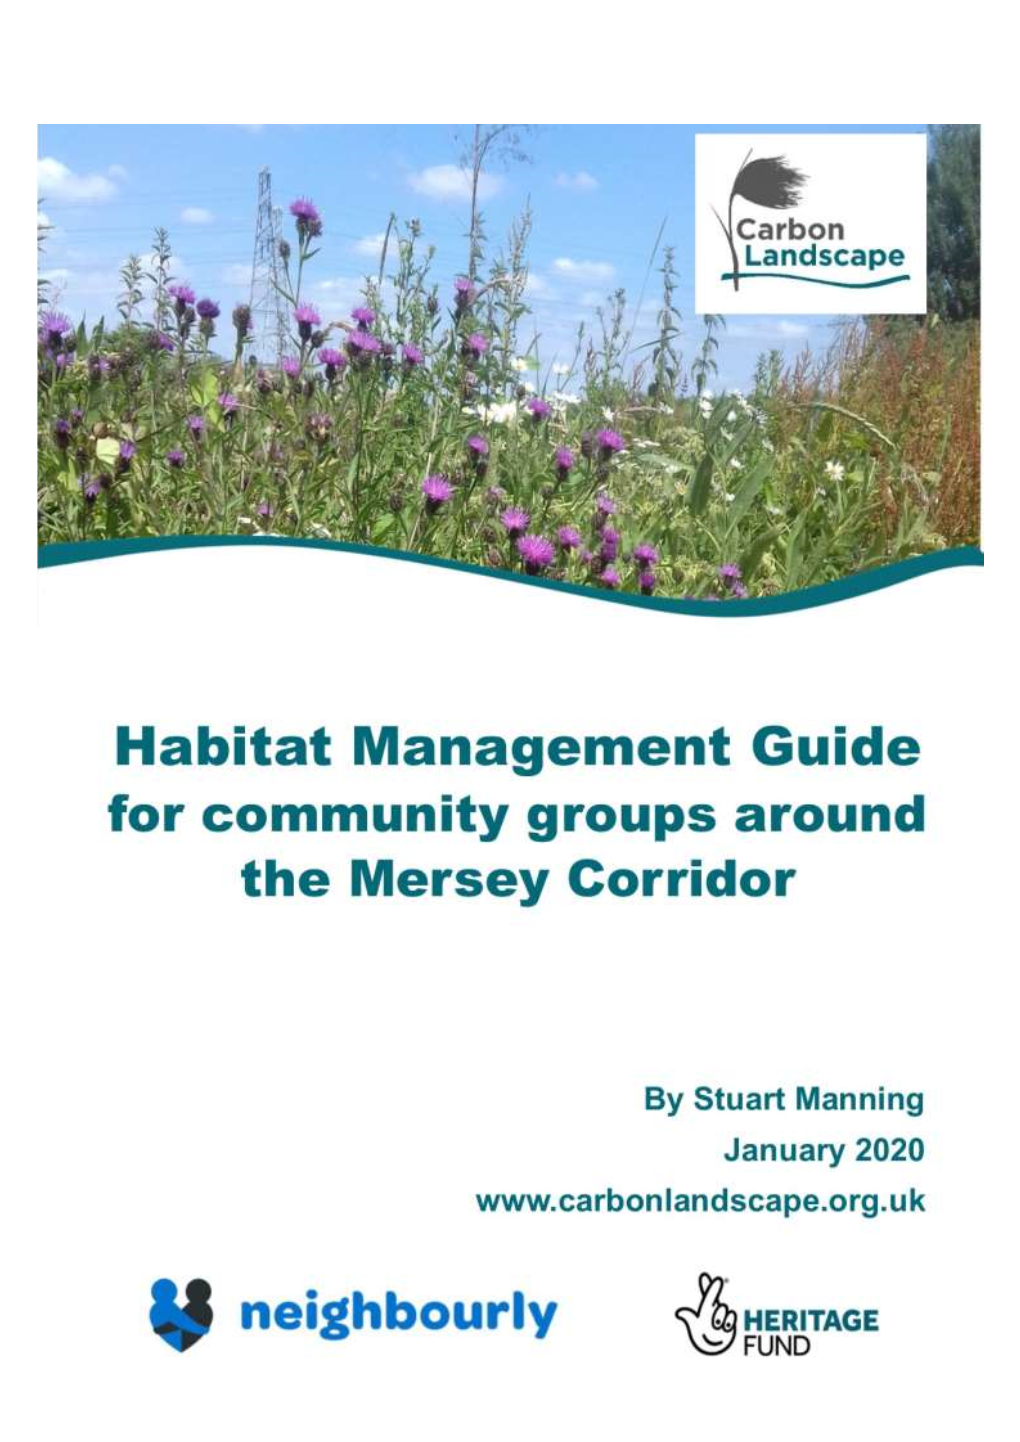 Guide for Habitat Management Around the Mersey